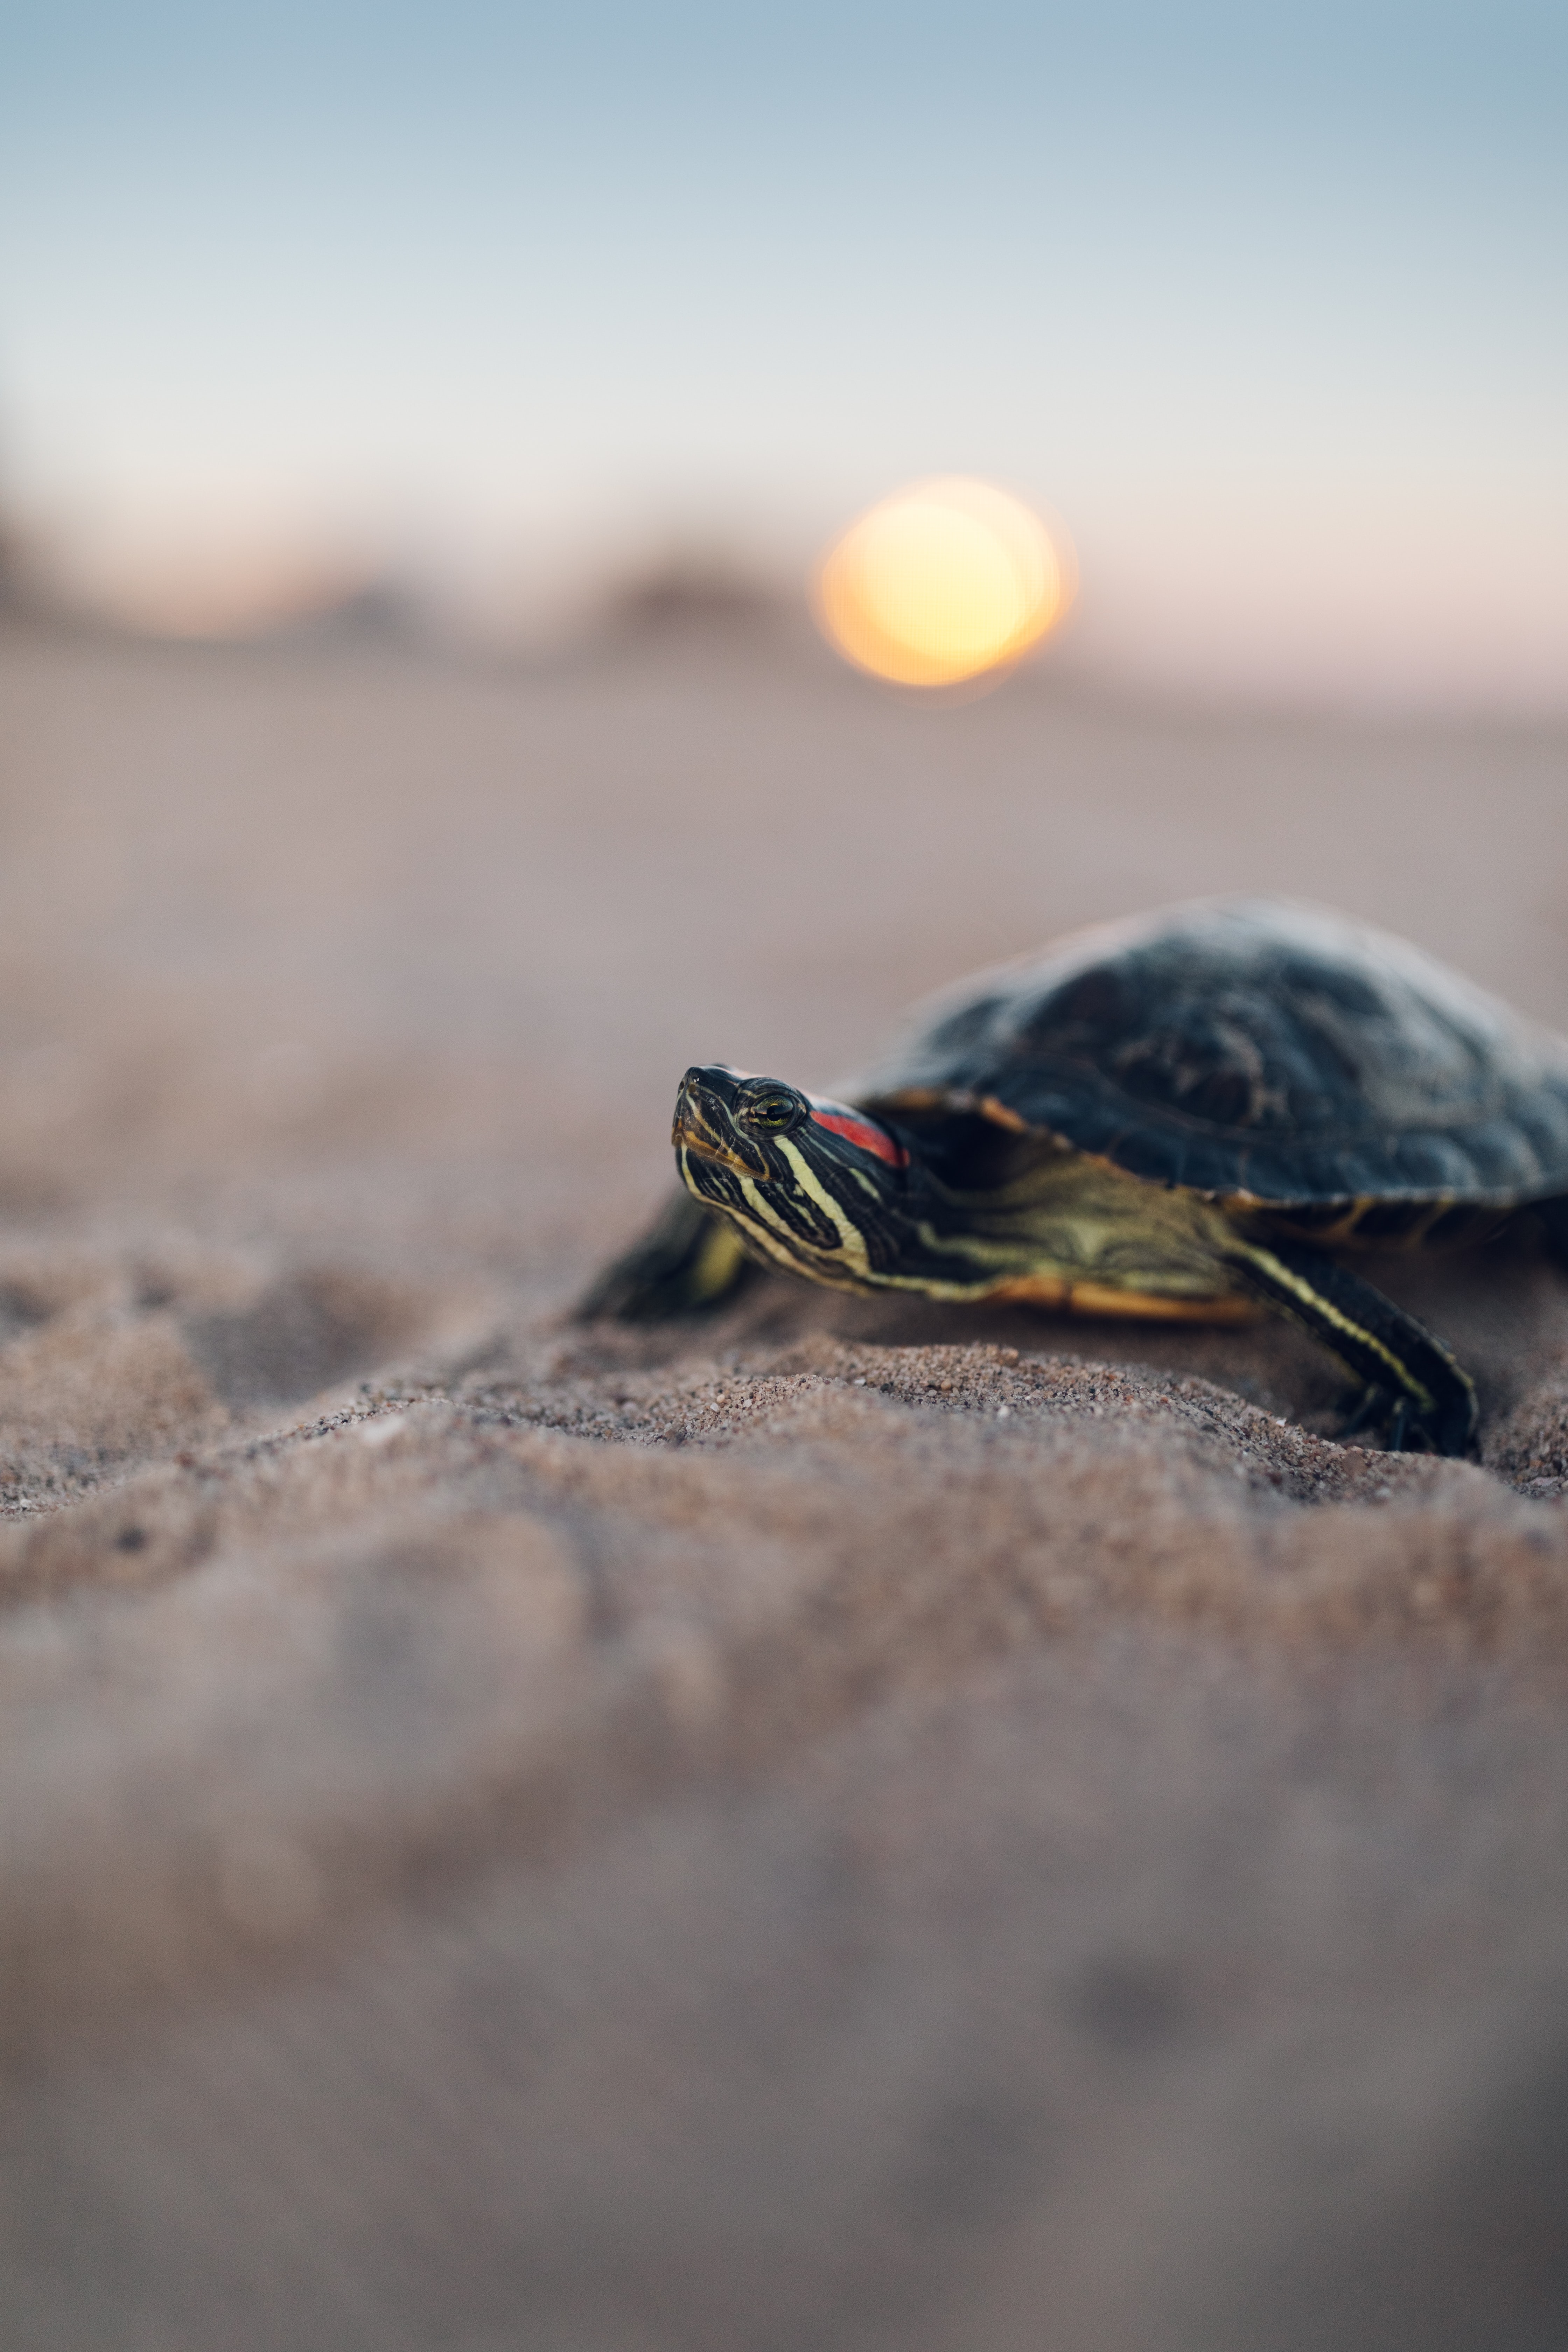 78286 Screensavers and Wallpapers Carapace for phone. Download animals, sand, blur, smooth, carapace, shell, turtle pictures for free